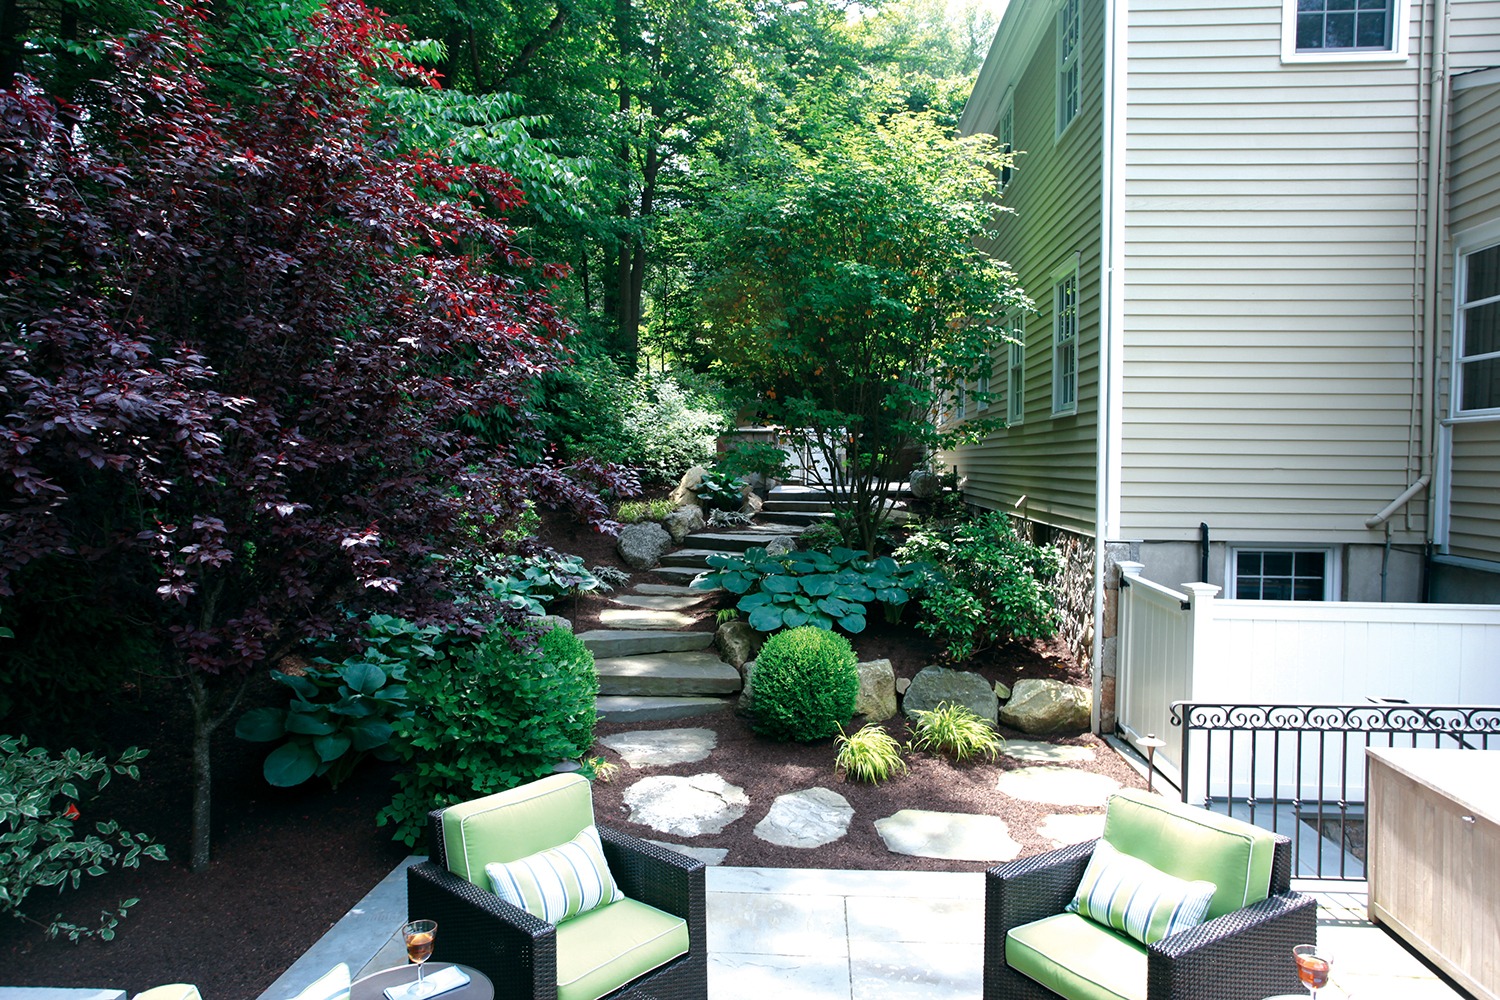 This image features a landscaped backyard with a stone pathway, green shrubbery, outdoor furniture, and a beige house with white trim.